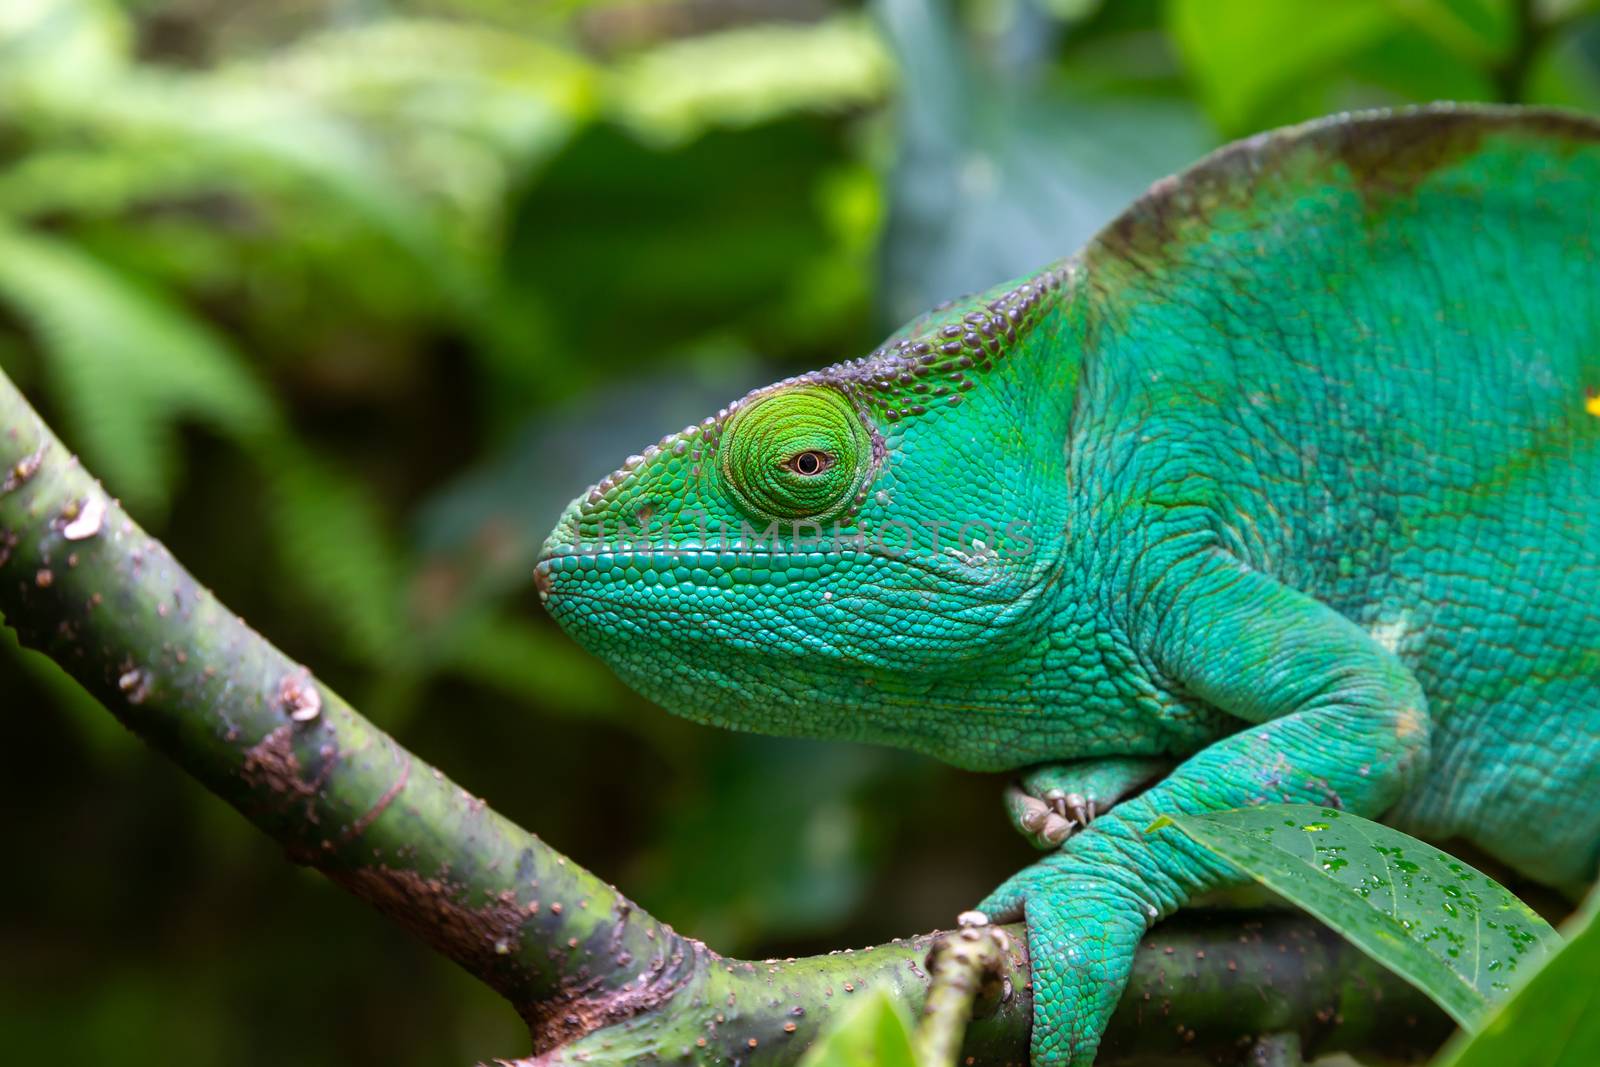 One green chameleon on a branch in close-up